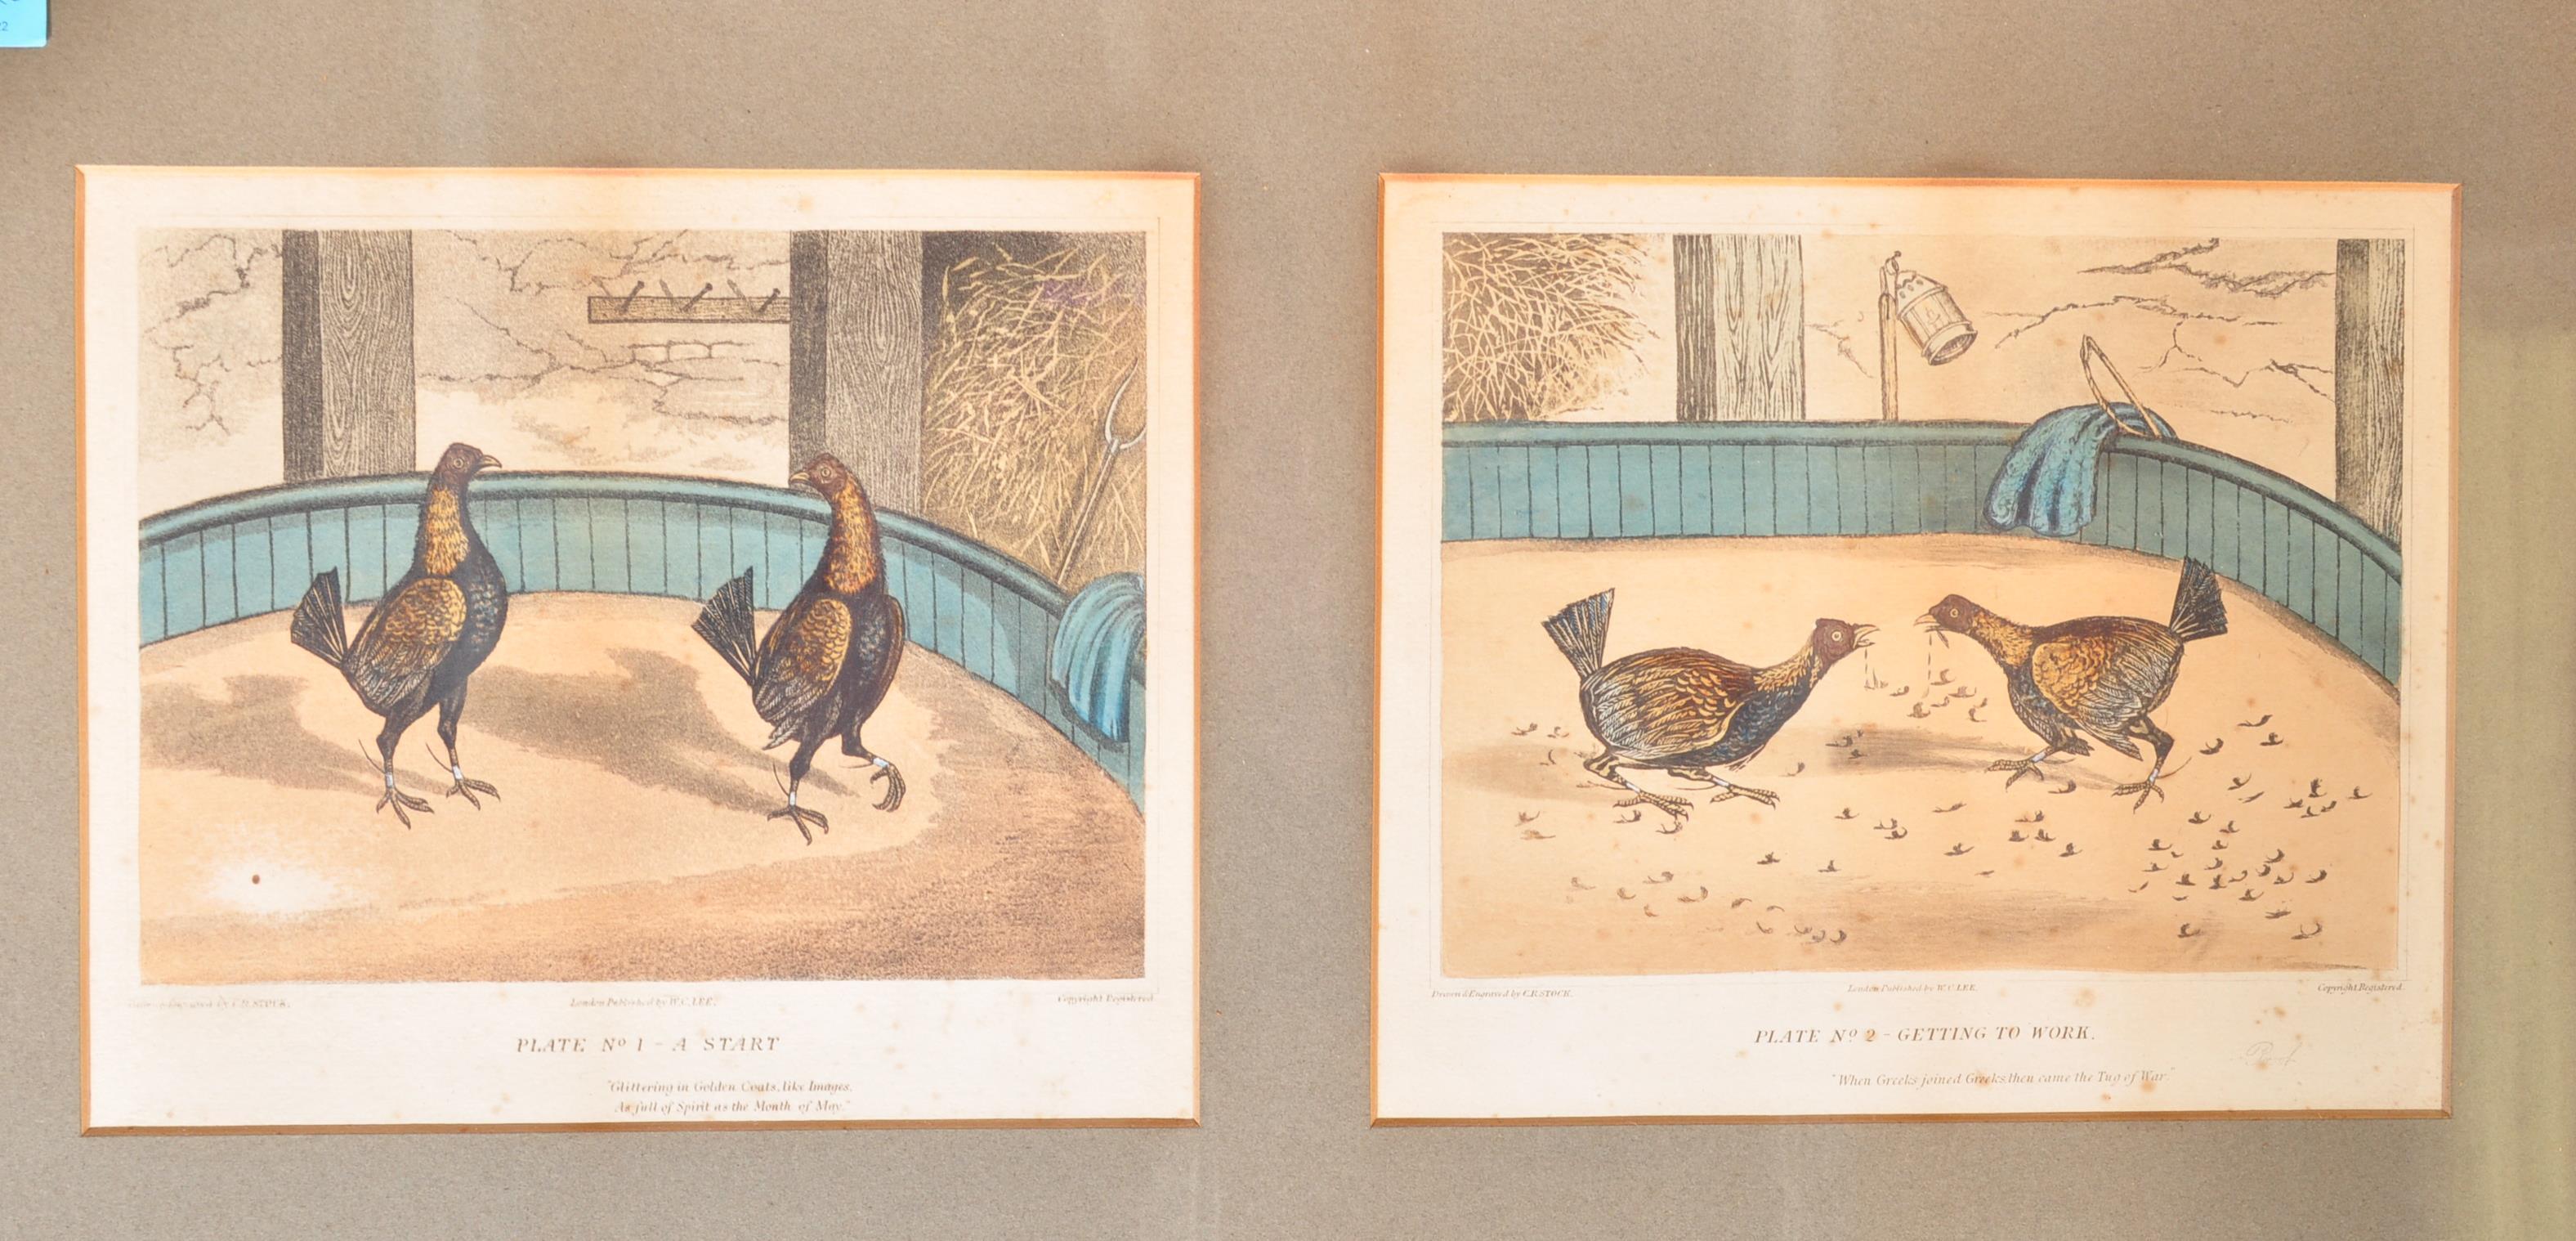 C. R. STOCK - EARLY 19TH CENTURY COCK FIGHTING ENGRAVINGS - Image 5 of 6